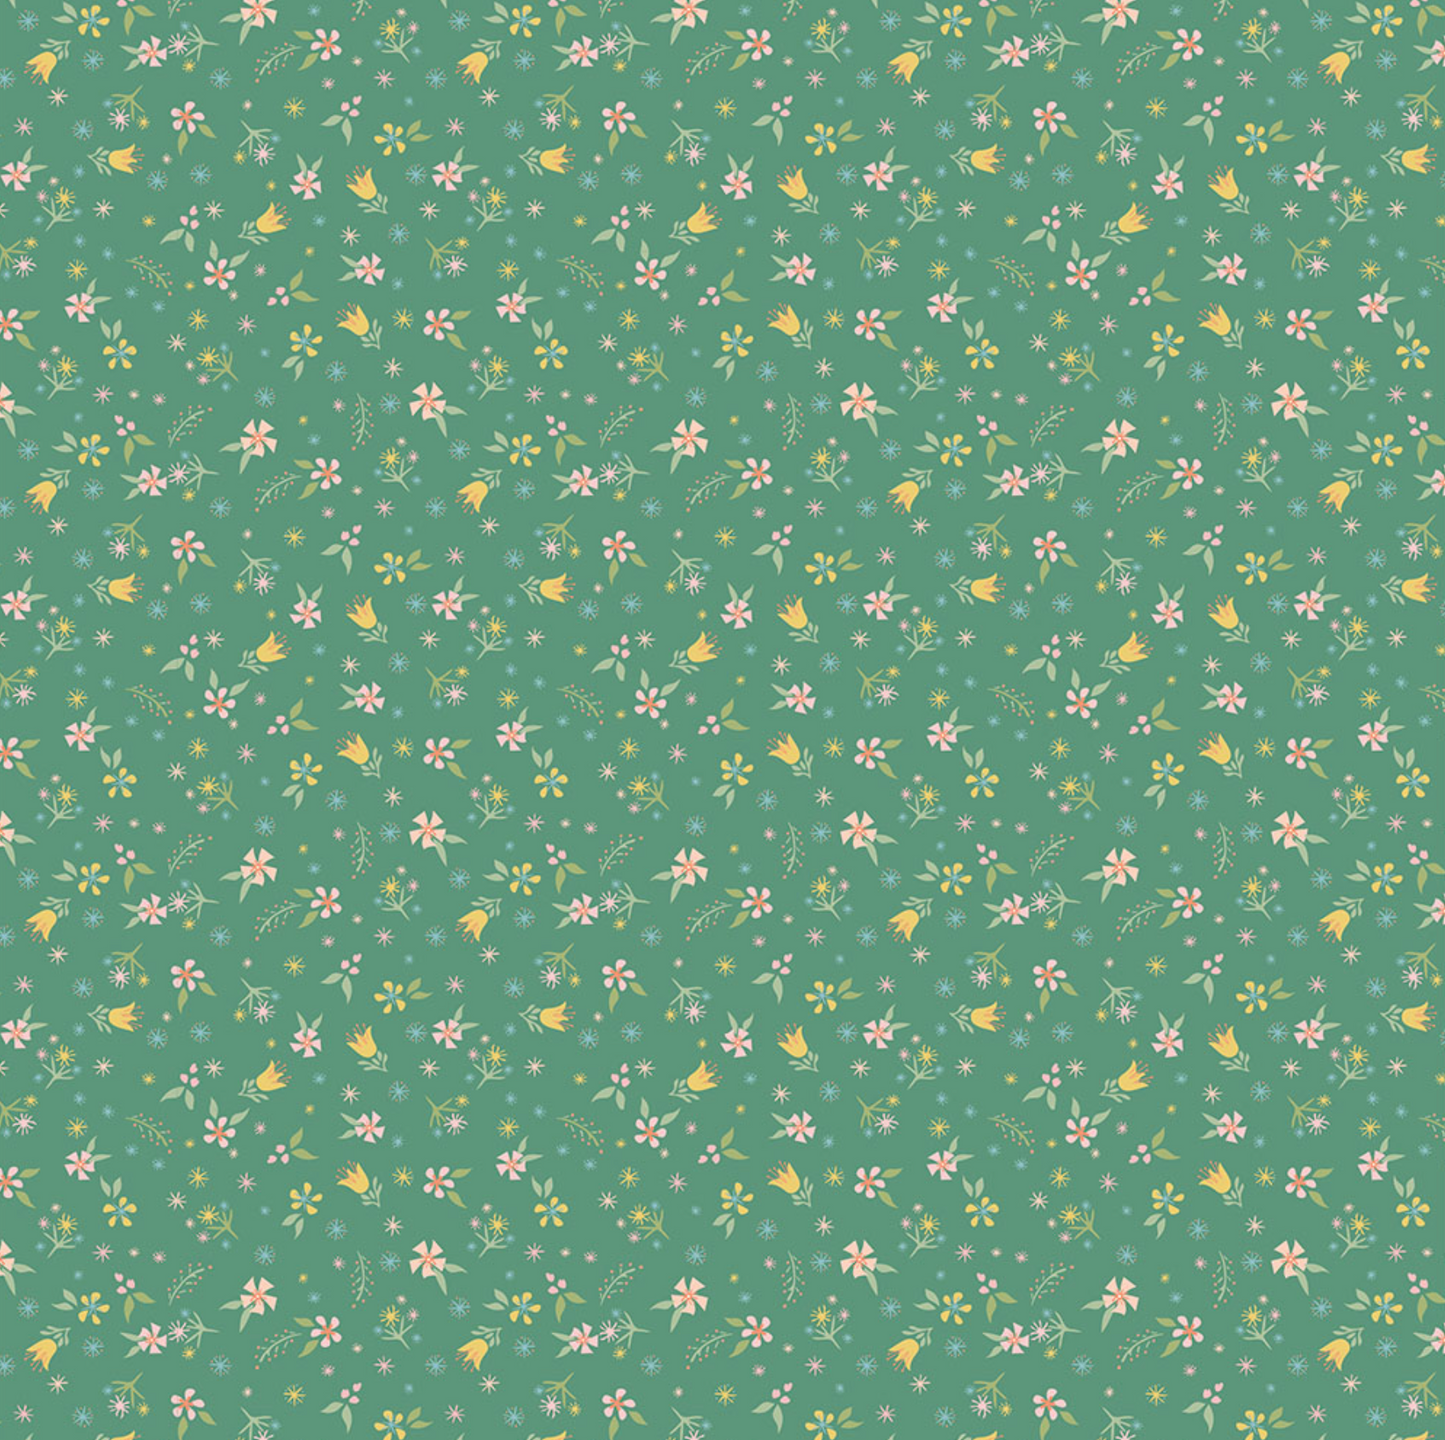 Finding Wonder Fabric, Blossom, Green, FW24204, sold by the 1/2 yard, *PREORDER